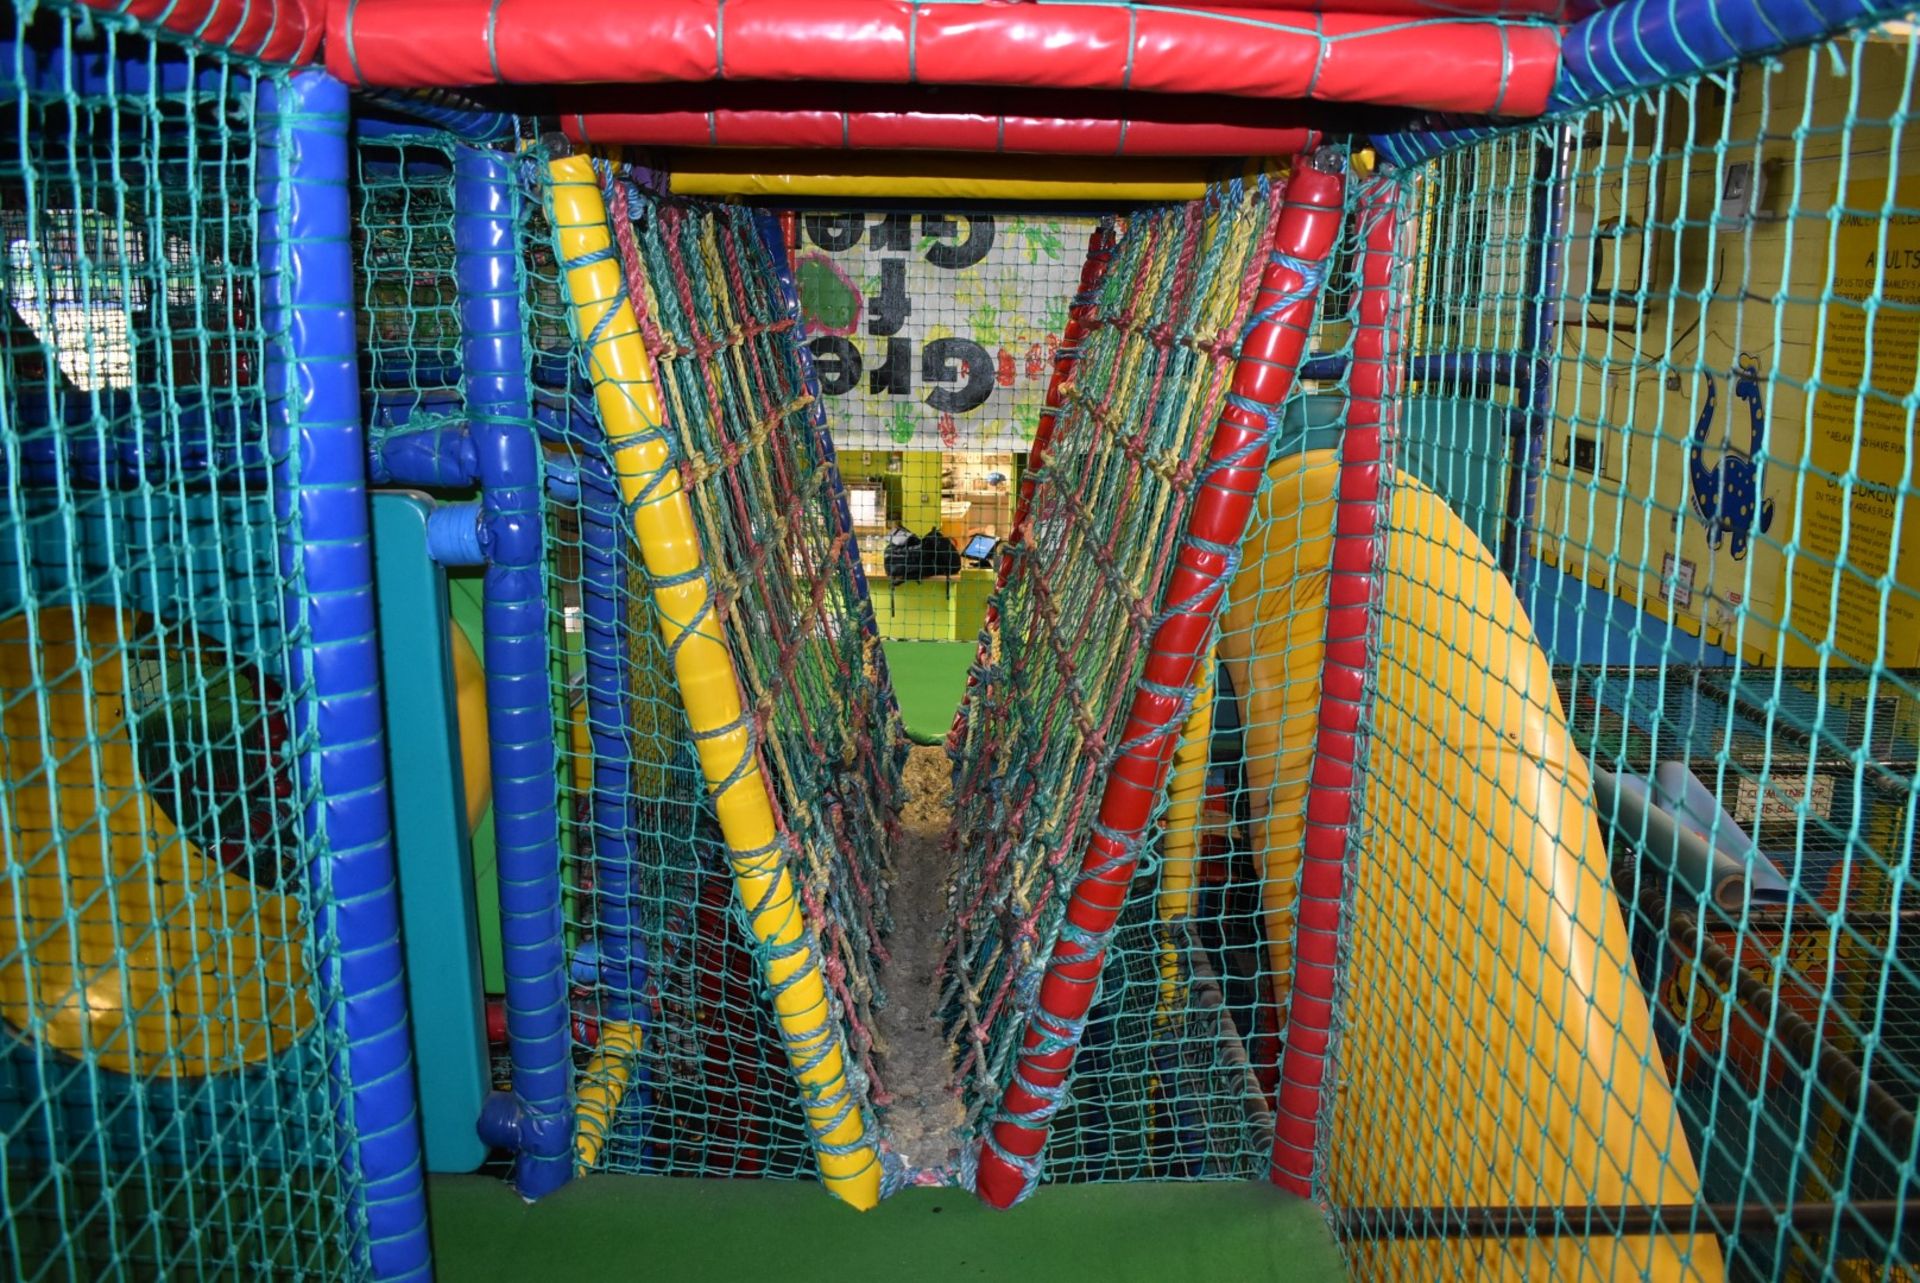 Bramleys Big Adventure Playground - Giant Action-Packed Playcentre With Slides, Zip Line Swings, - Image 45 of 128